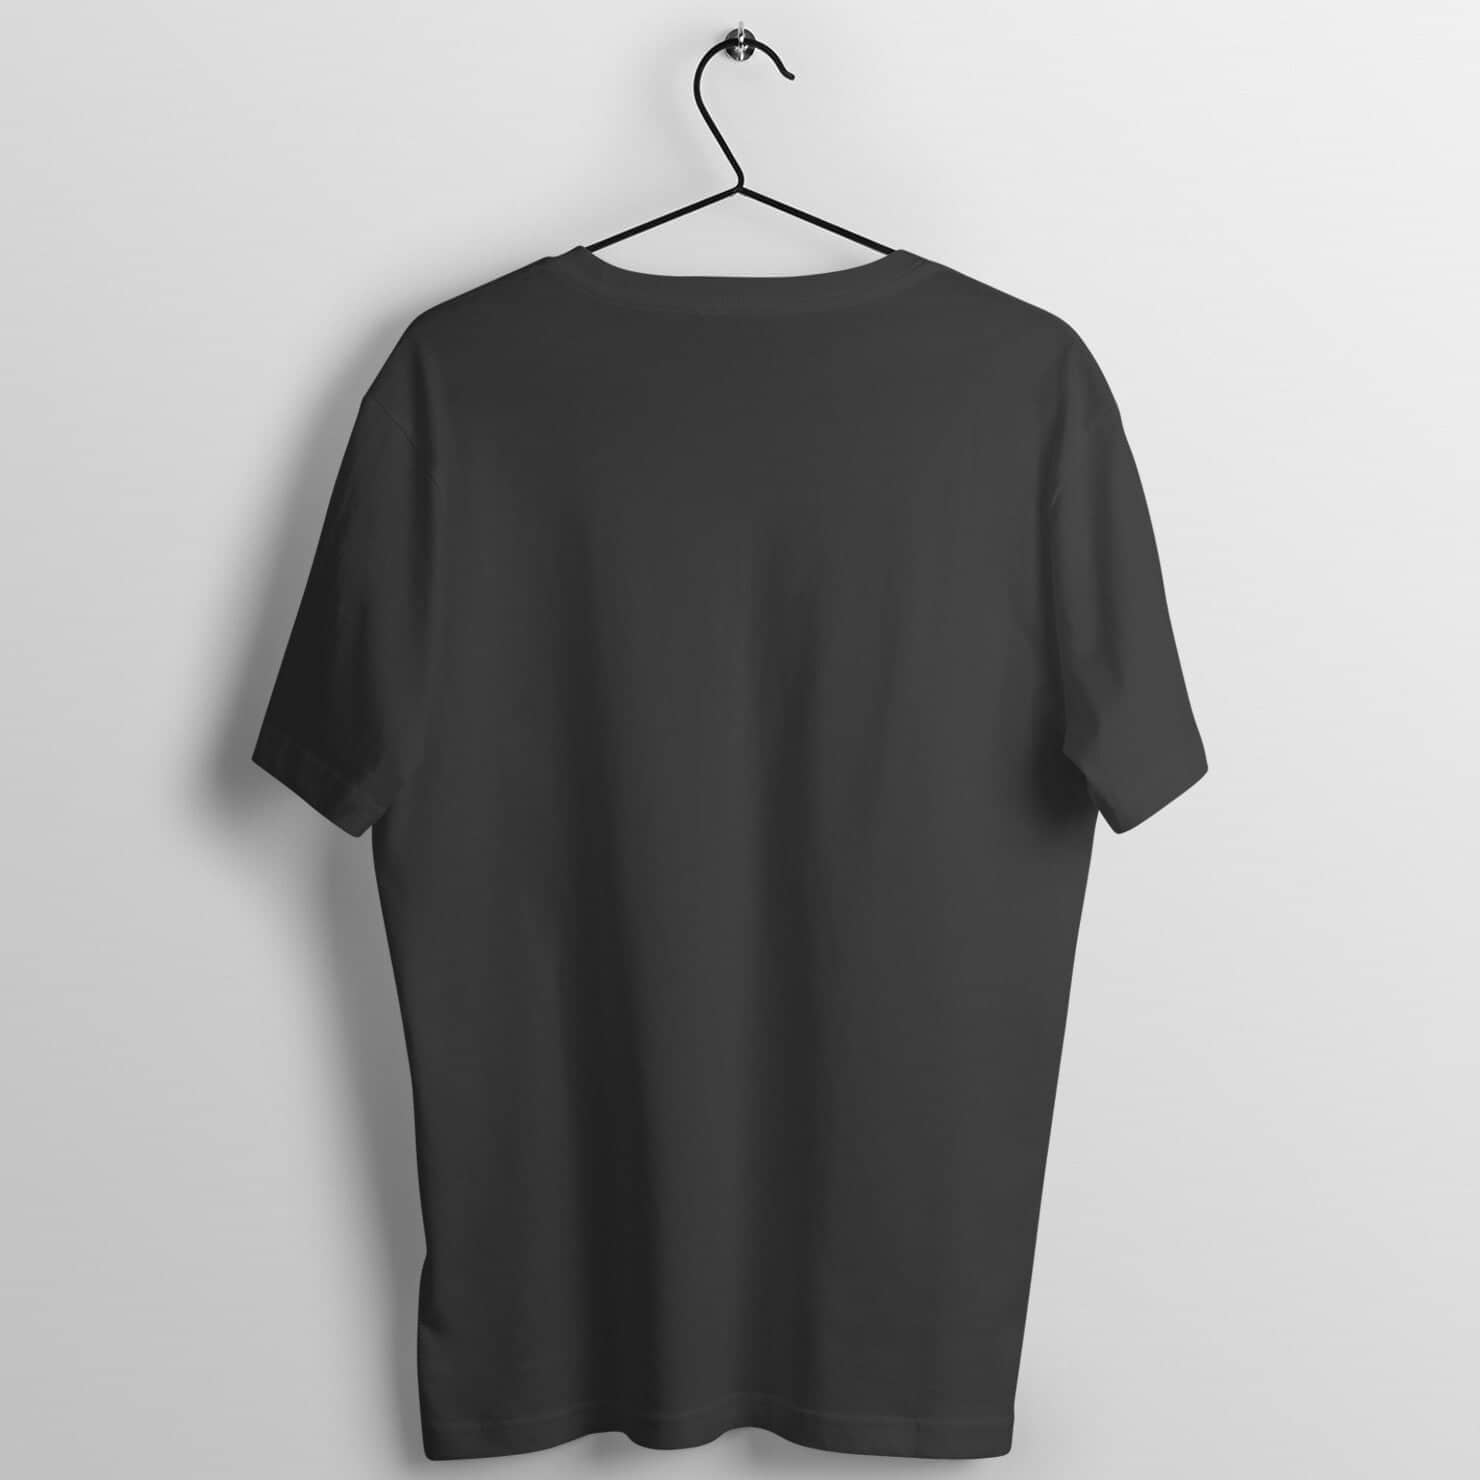 Crypto Millionaire Loading Exclusive Black T Shirt for Men and Women freeshipping - Catch My Drift India